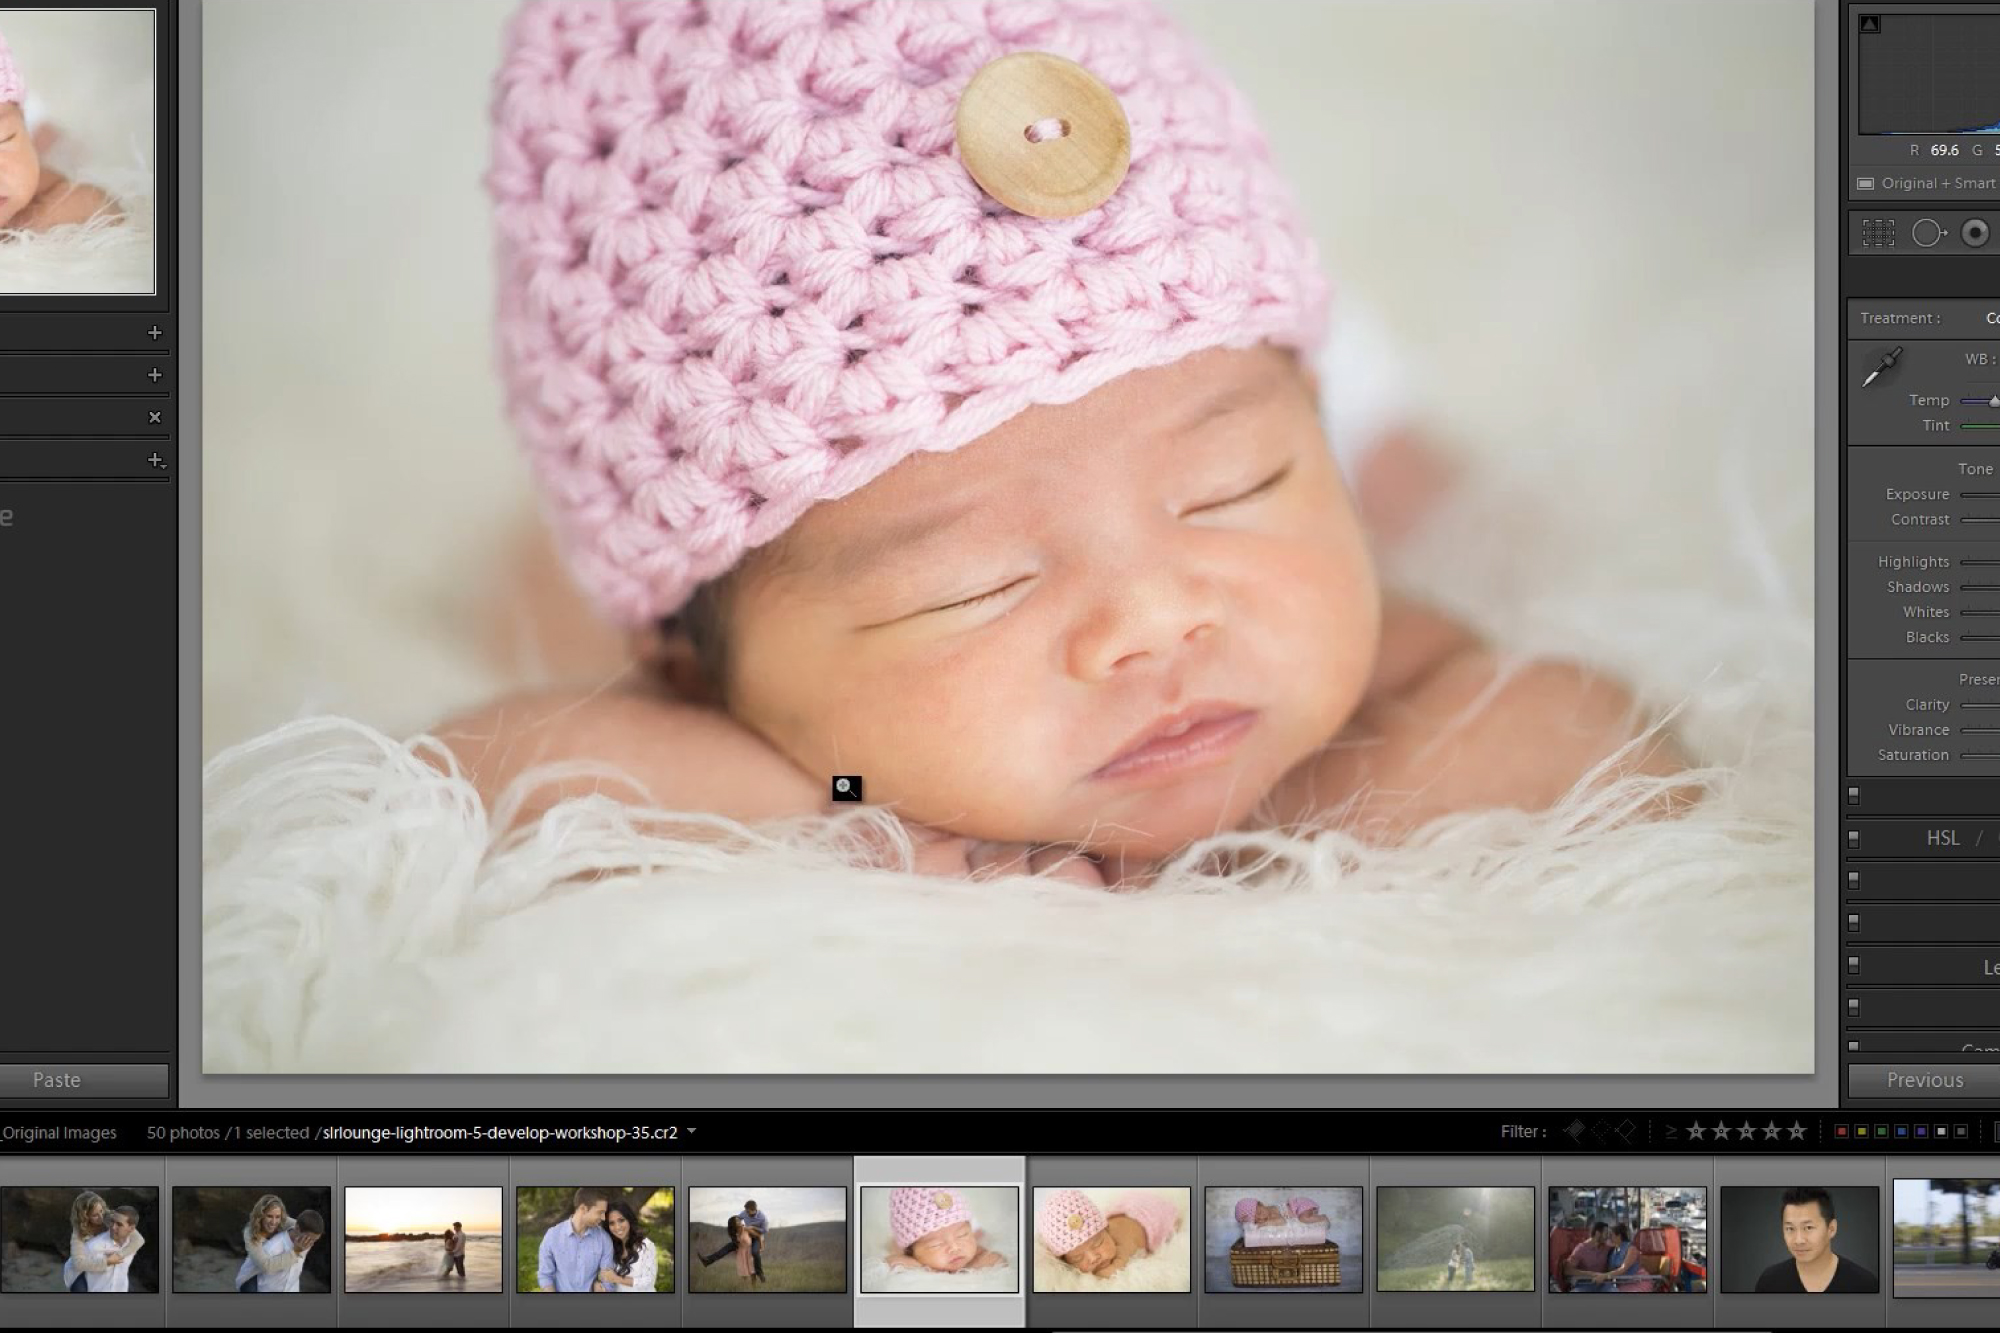 Lightroom Image Processing Mastery: Spot Removal and Healing